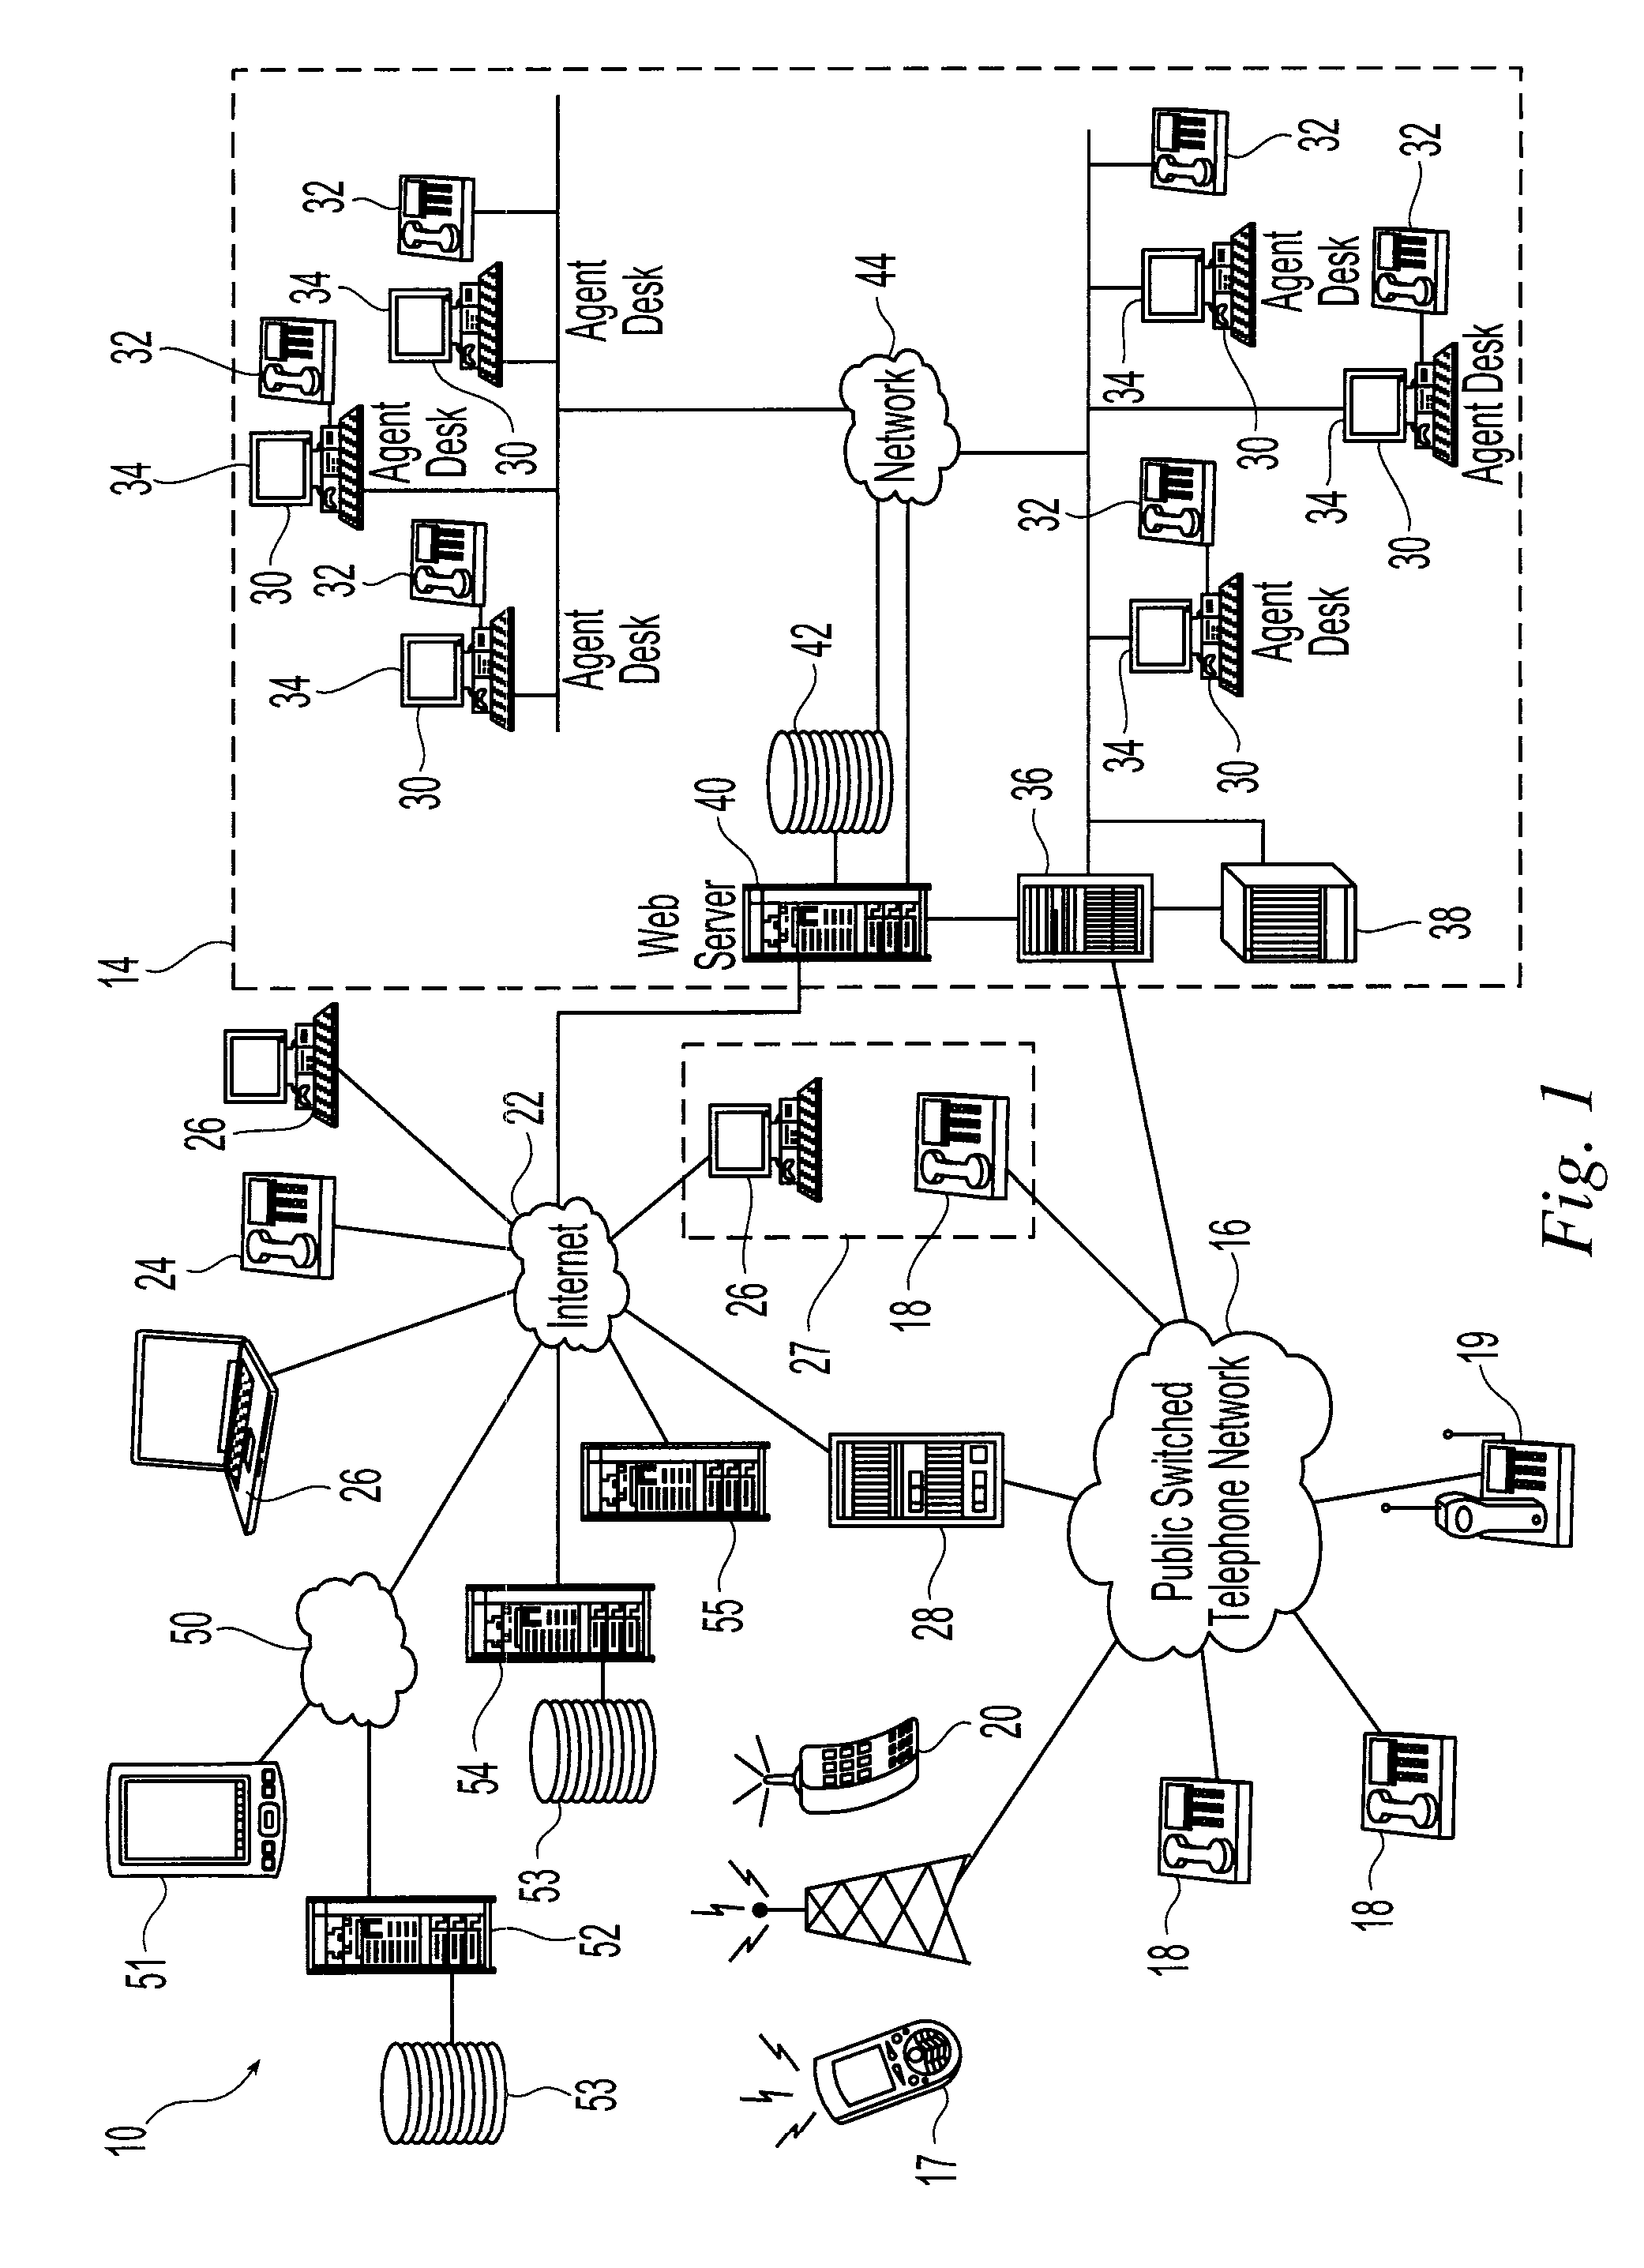 Method for intelligent and automated transmission of local context in converged signaling